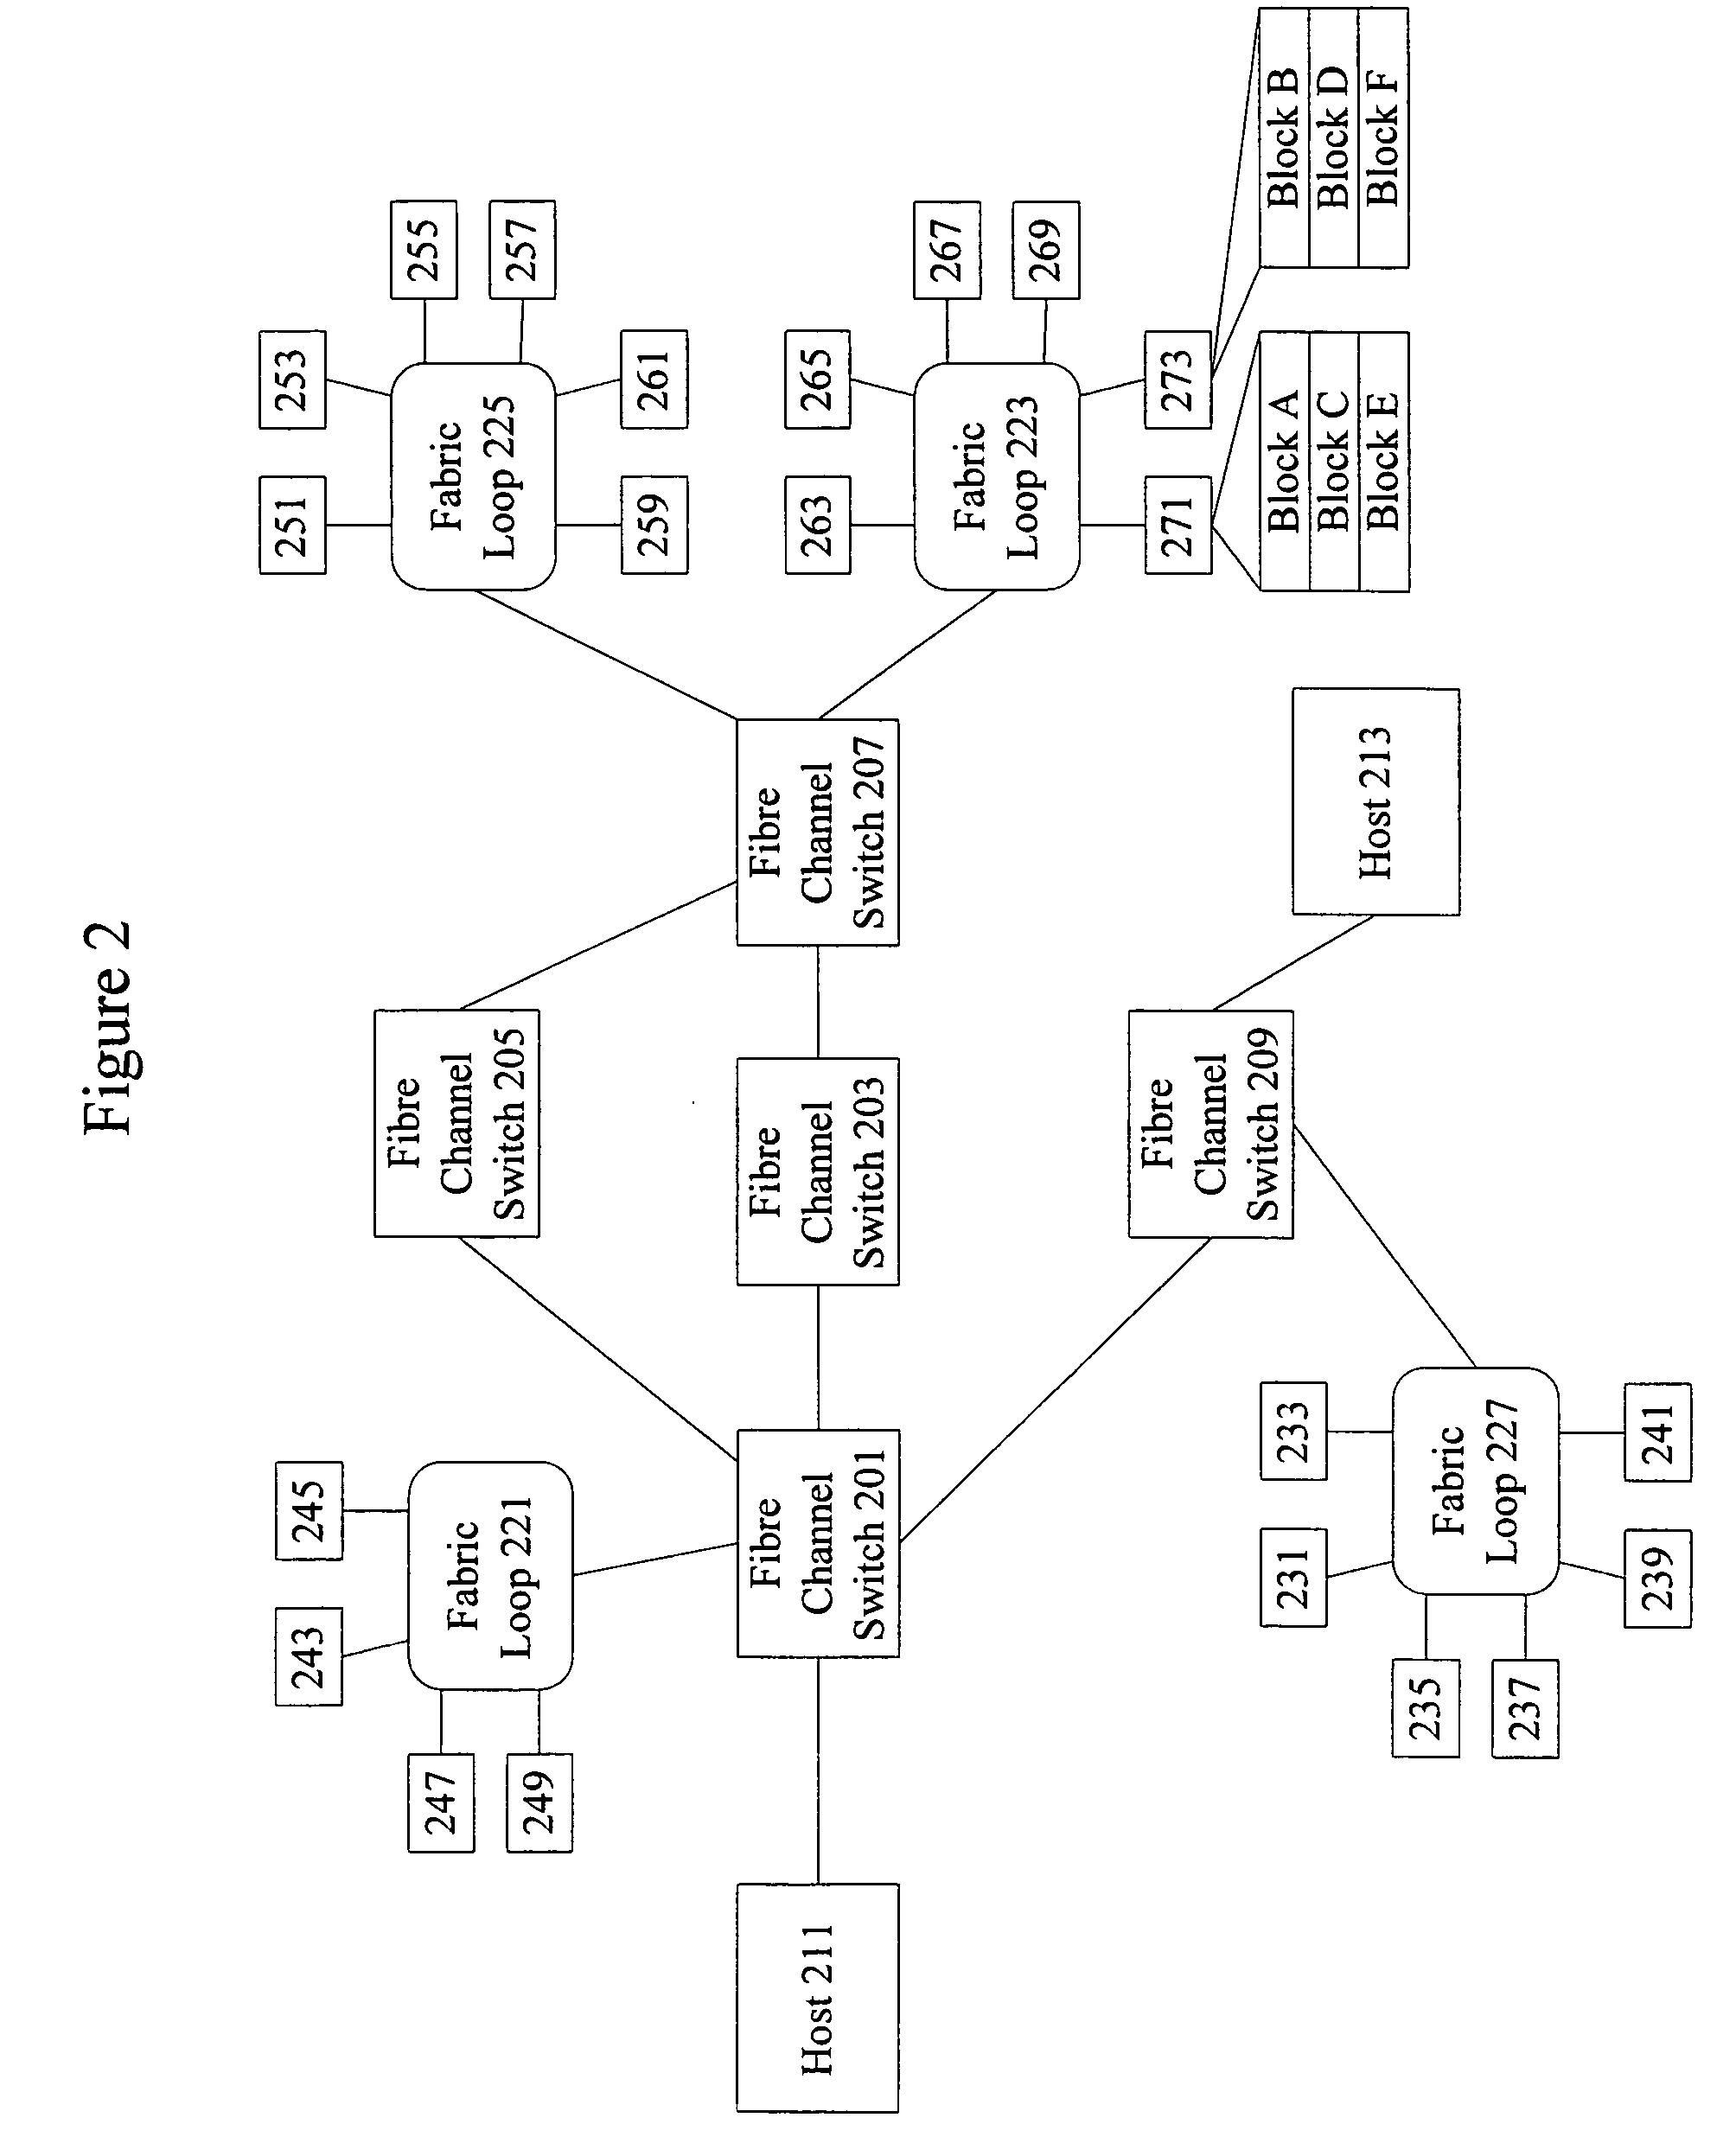 Network topology based storage allocation for virtualization